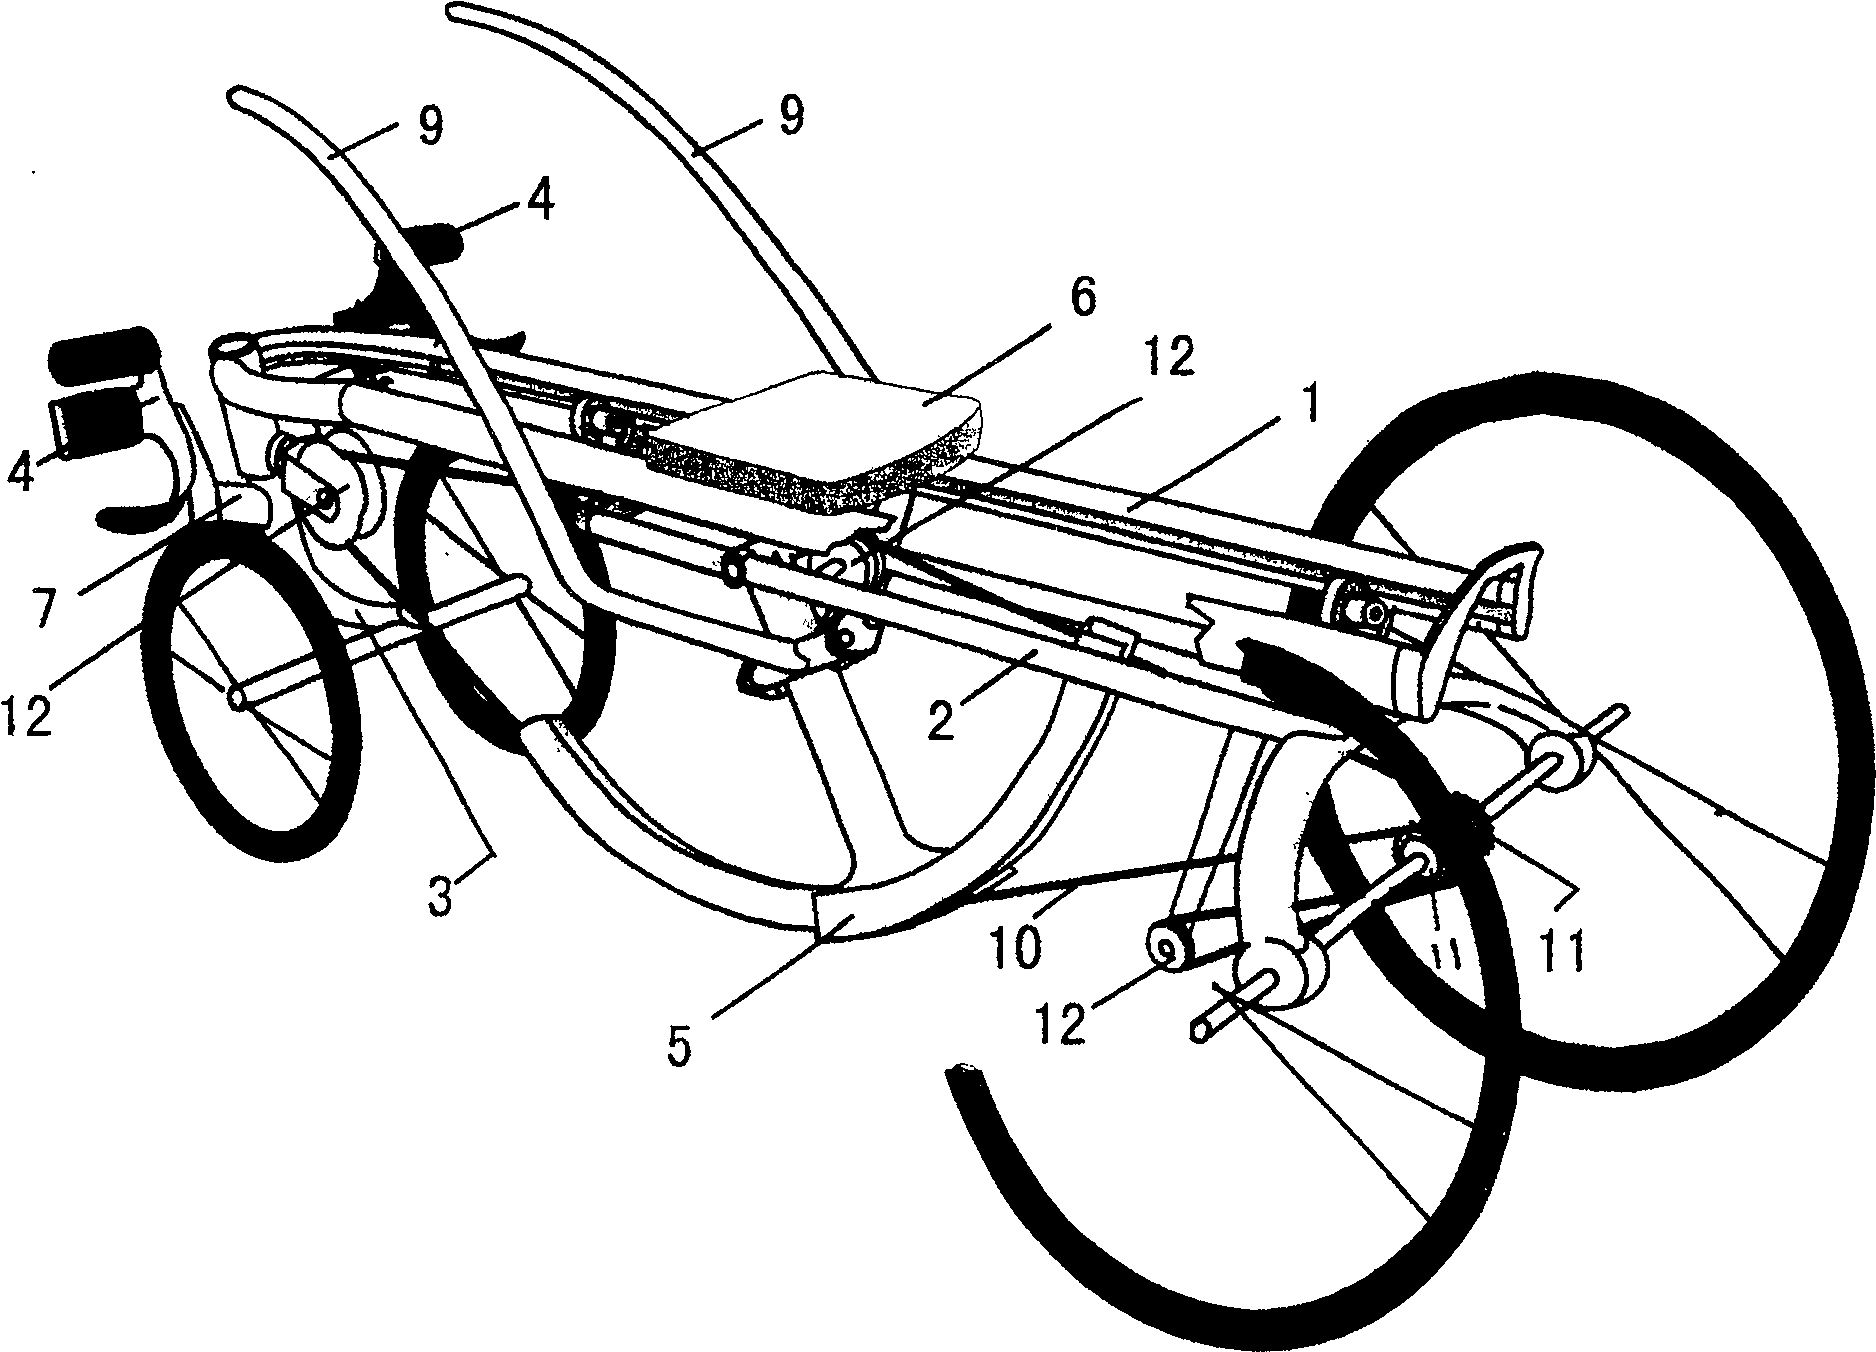 Bicycle driven by rowing and sliding